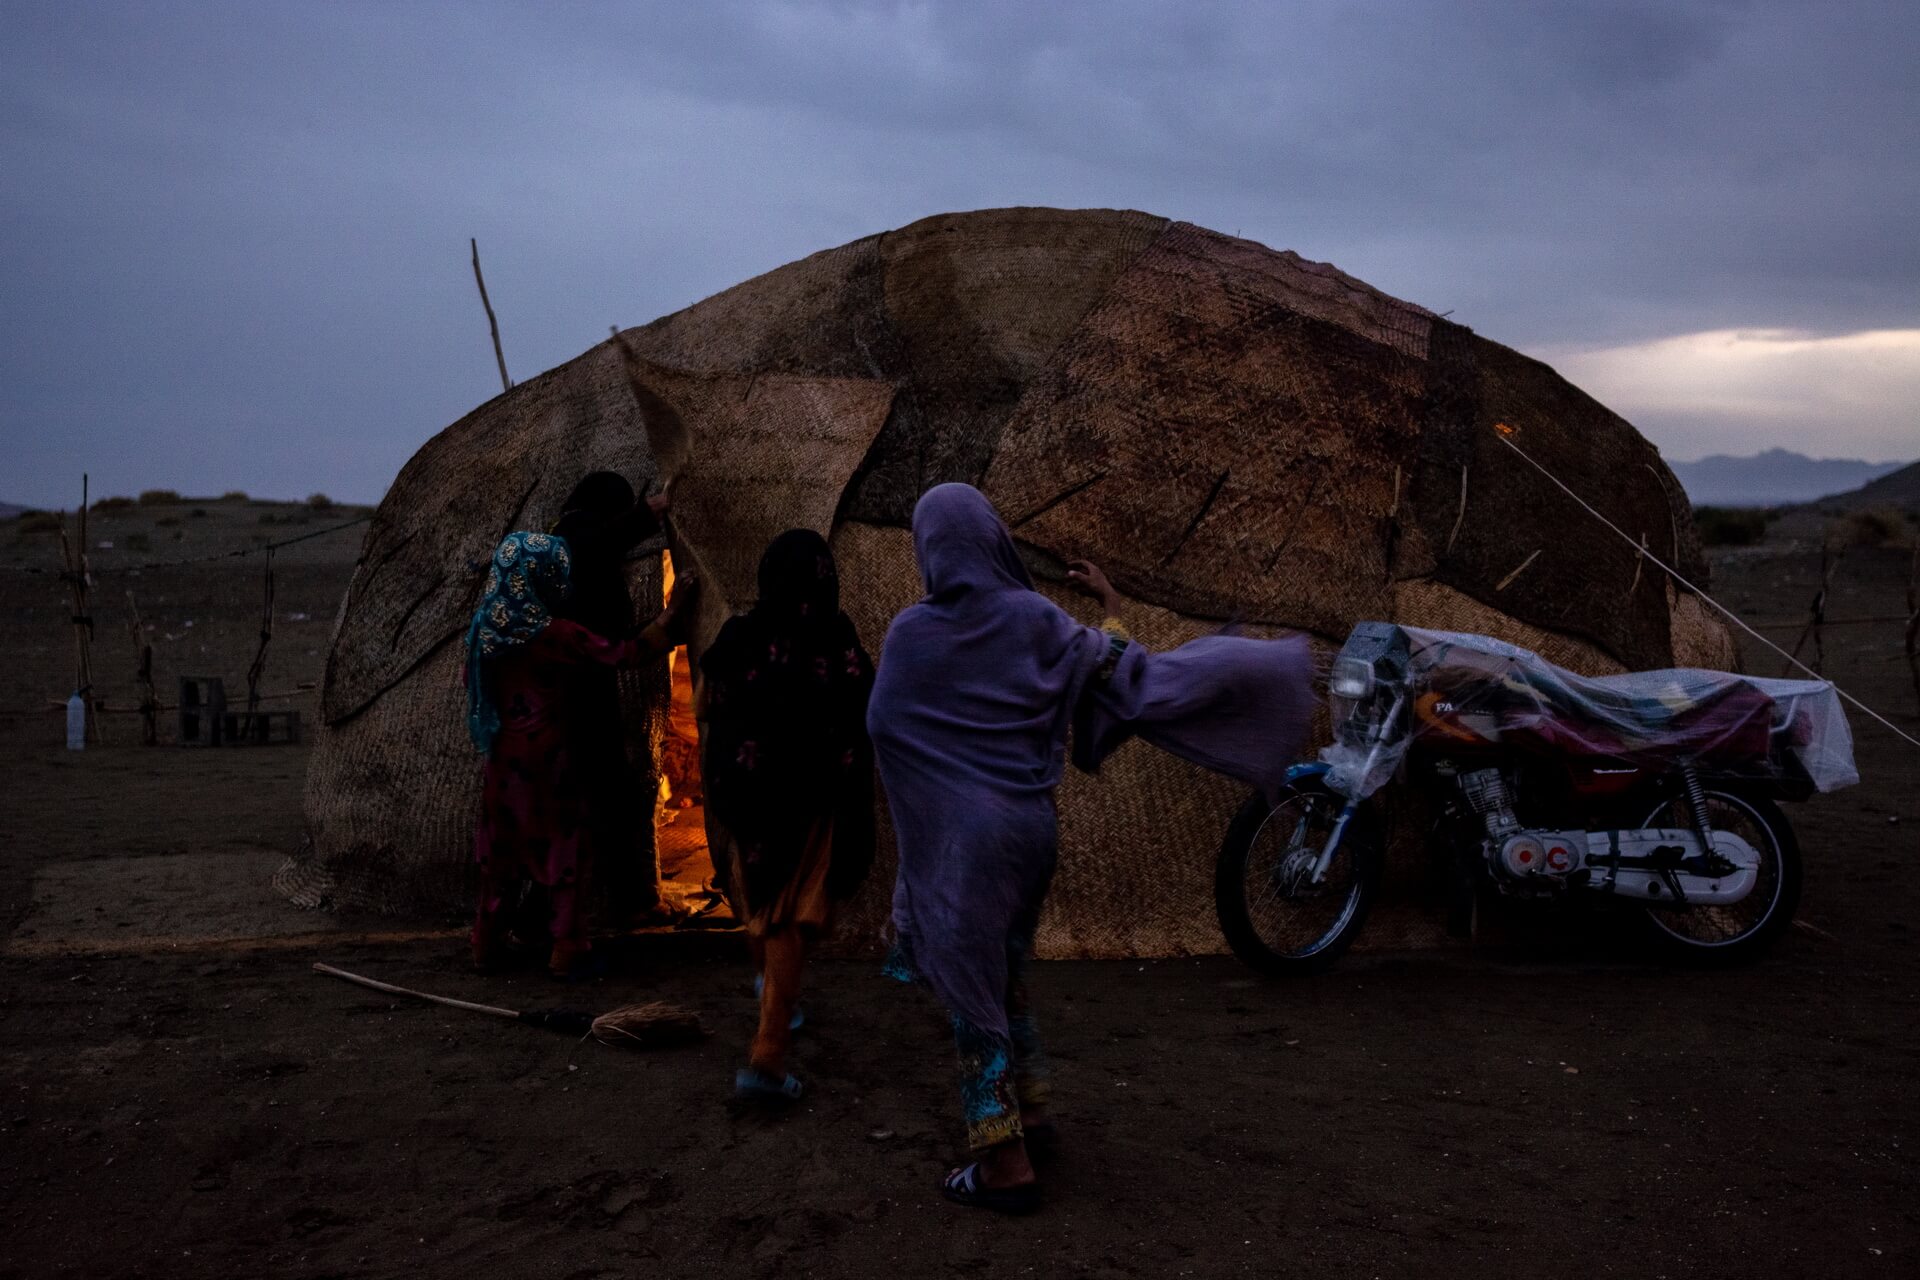 10 February 2019
Too Rig 3, Sowlan, Kerman Province, Iran
It's raining. The motorcycle is covered with plastic. The family gathered in the tent of Belgeys around the fire.